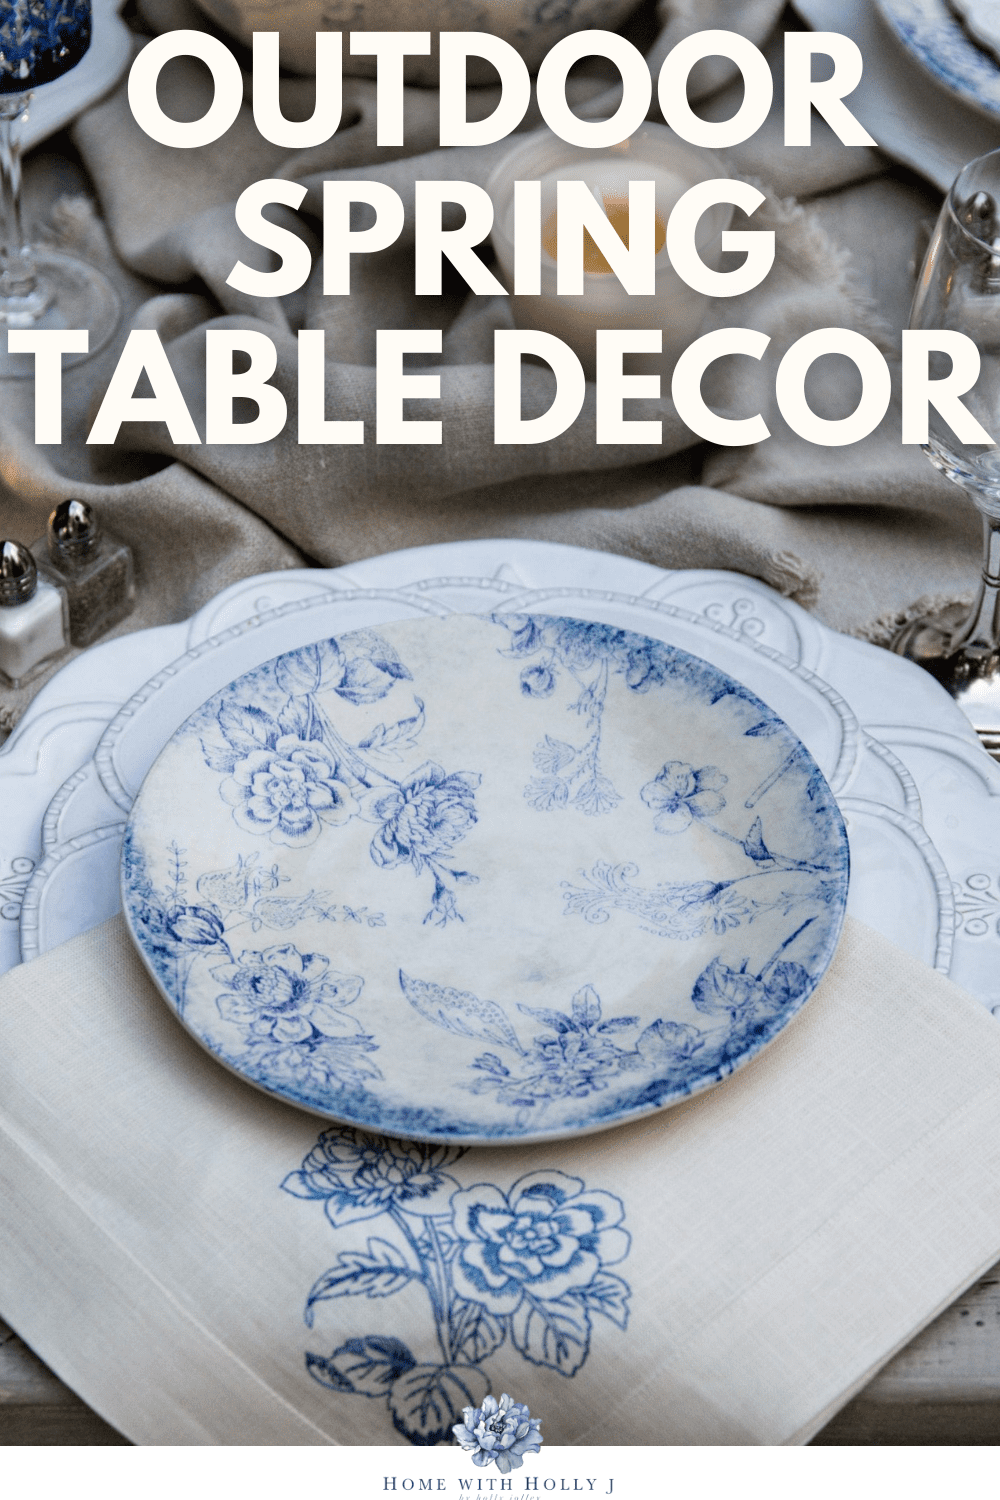 Sharing outdoor spring table decor ideas and inspiration including a spring table setting with white and blue hydrangeas